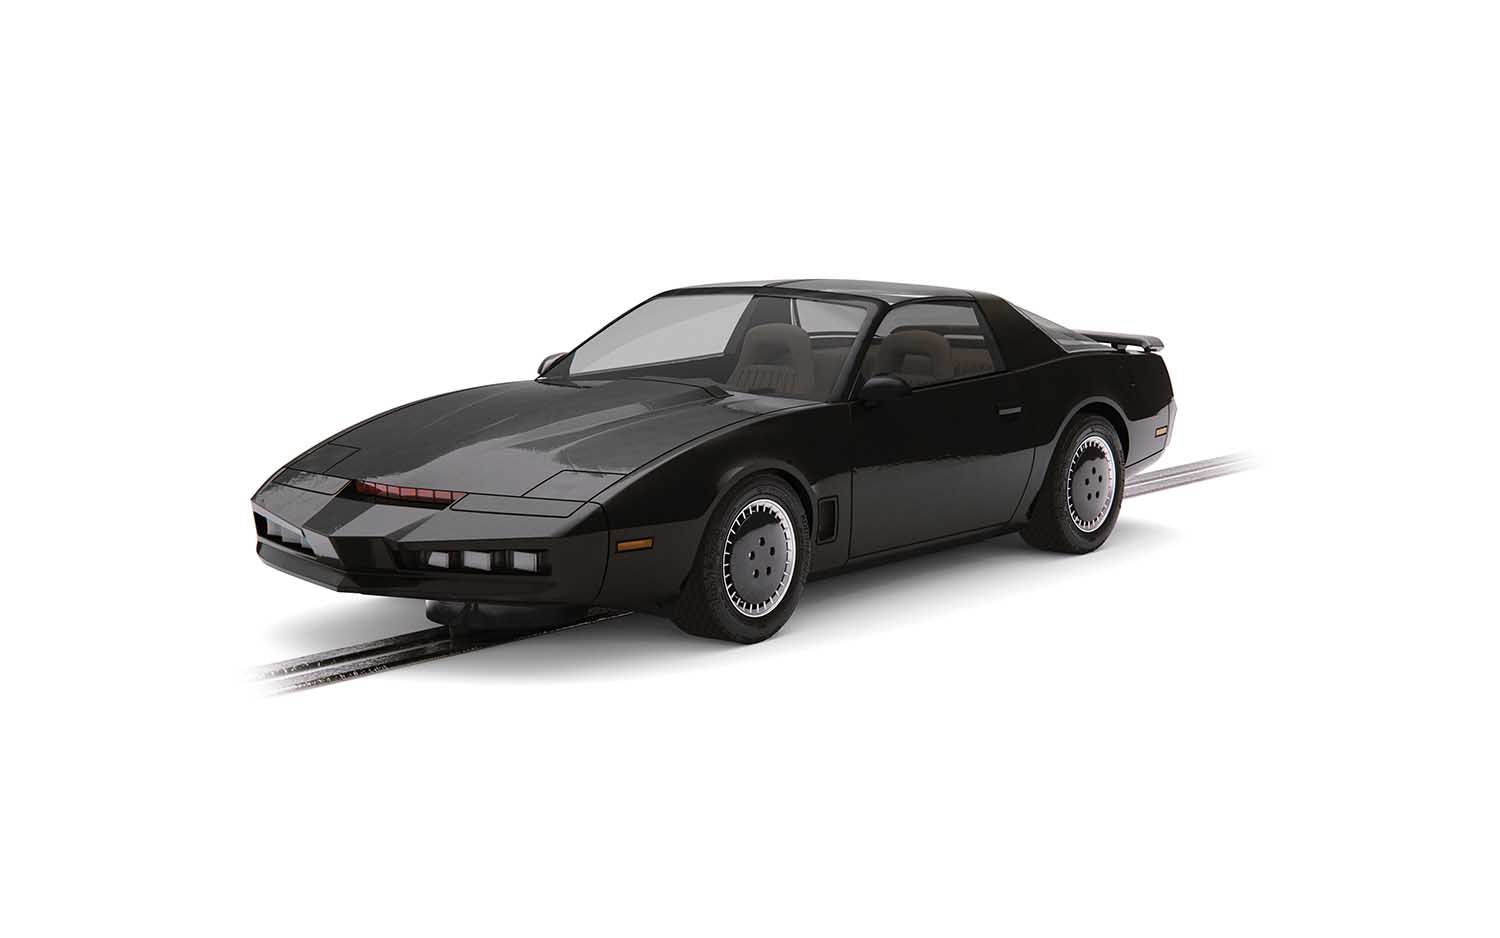 Knight Rider Car - The History and Features of K.I.T.T.